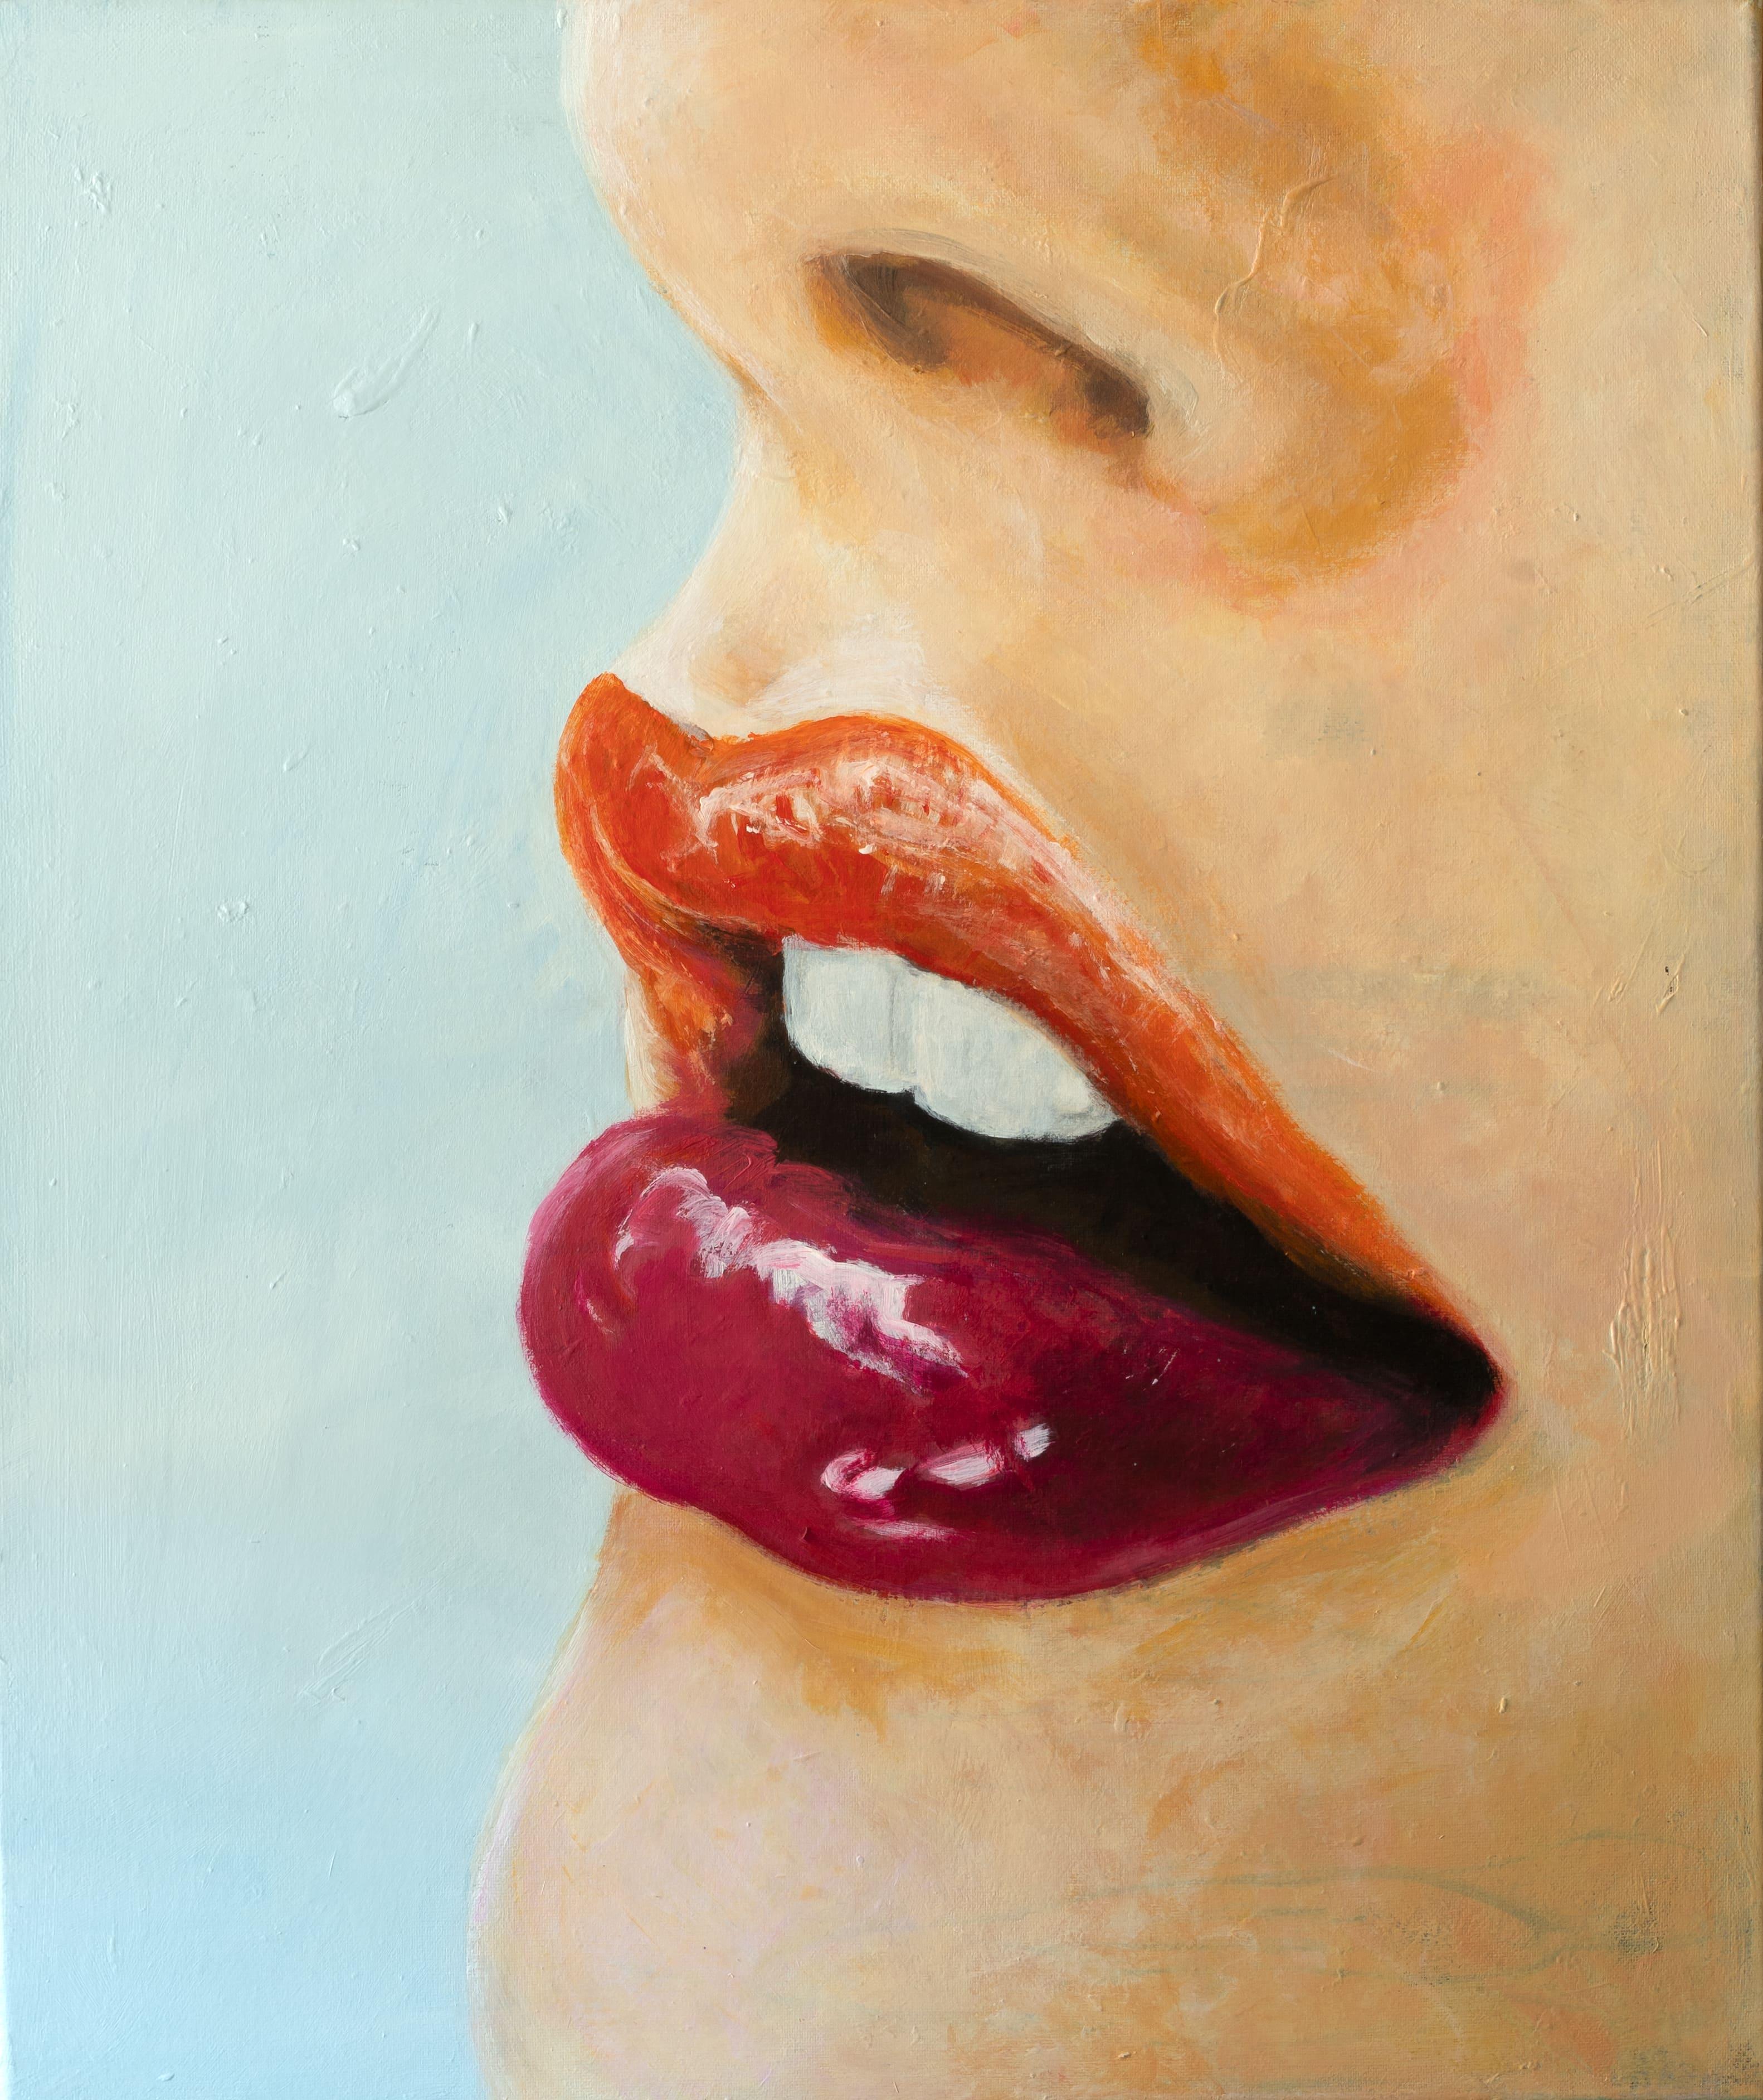 Gloss by Asun Huete - Painting by Unattributed